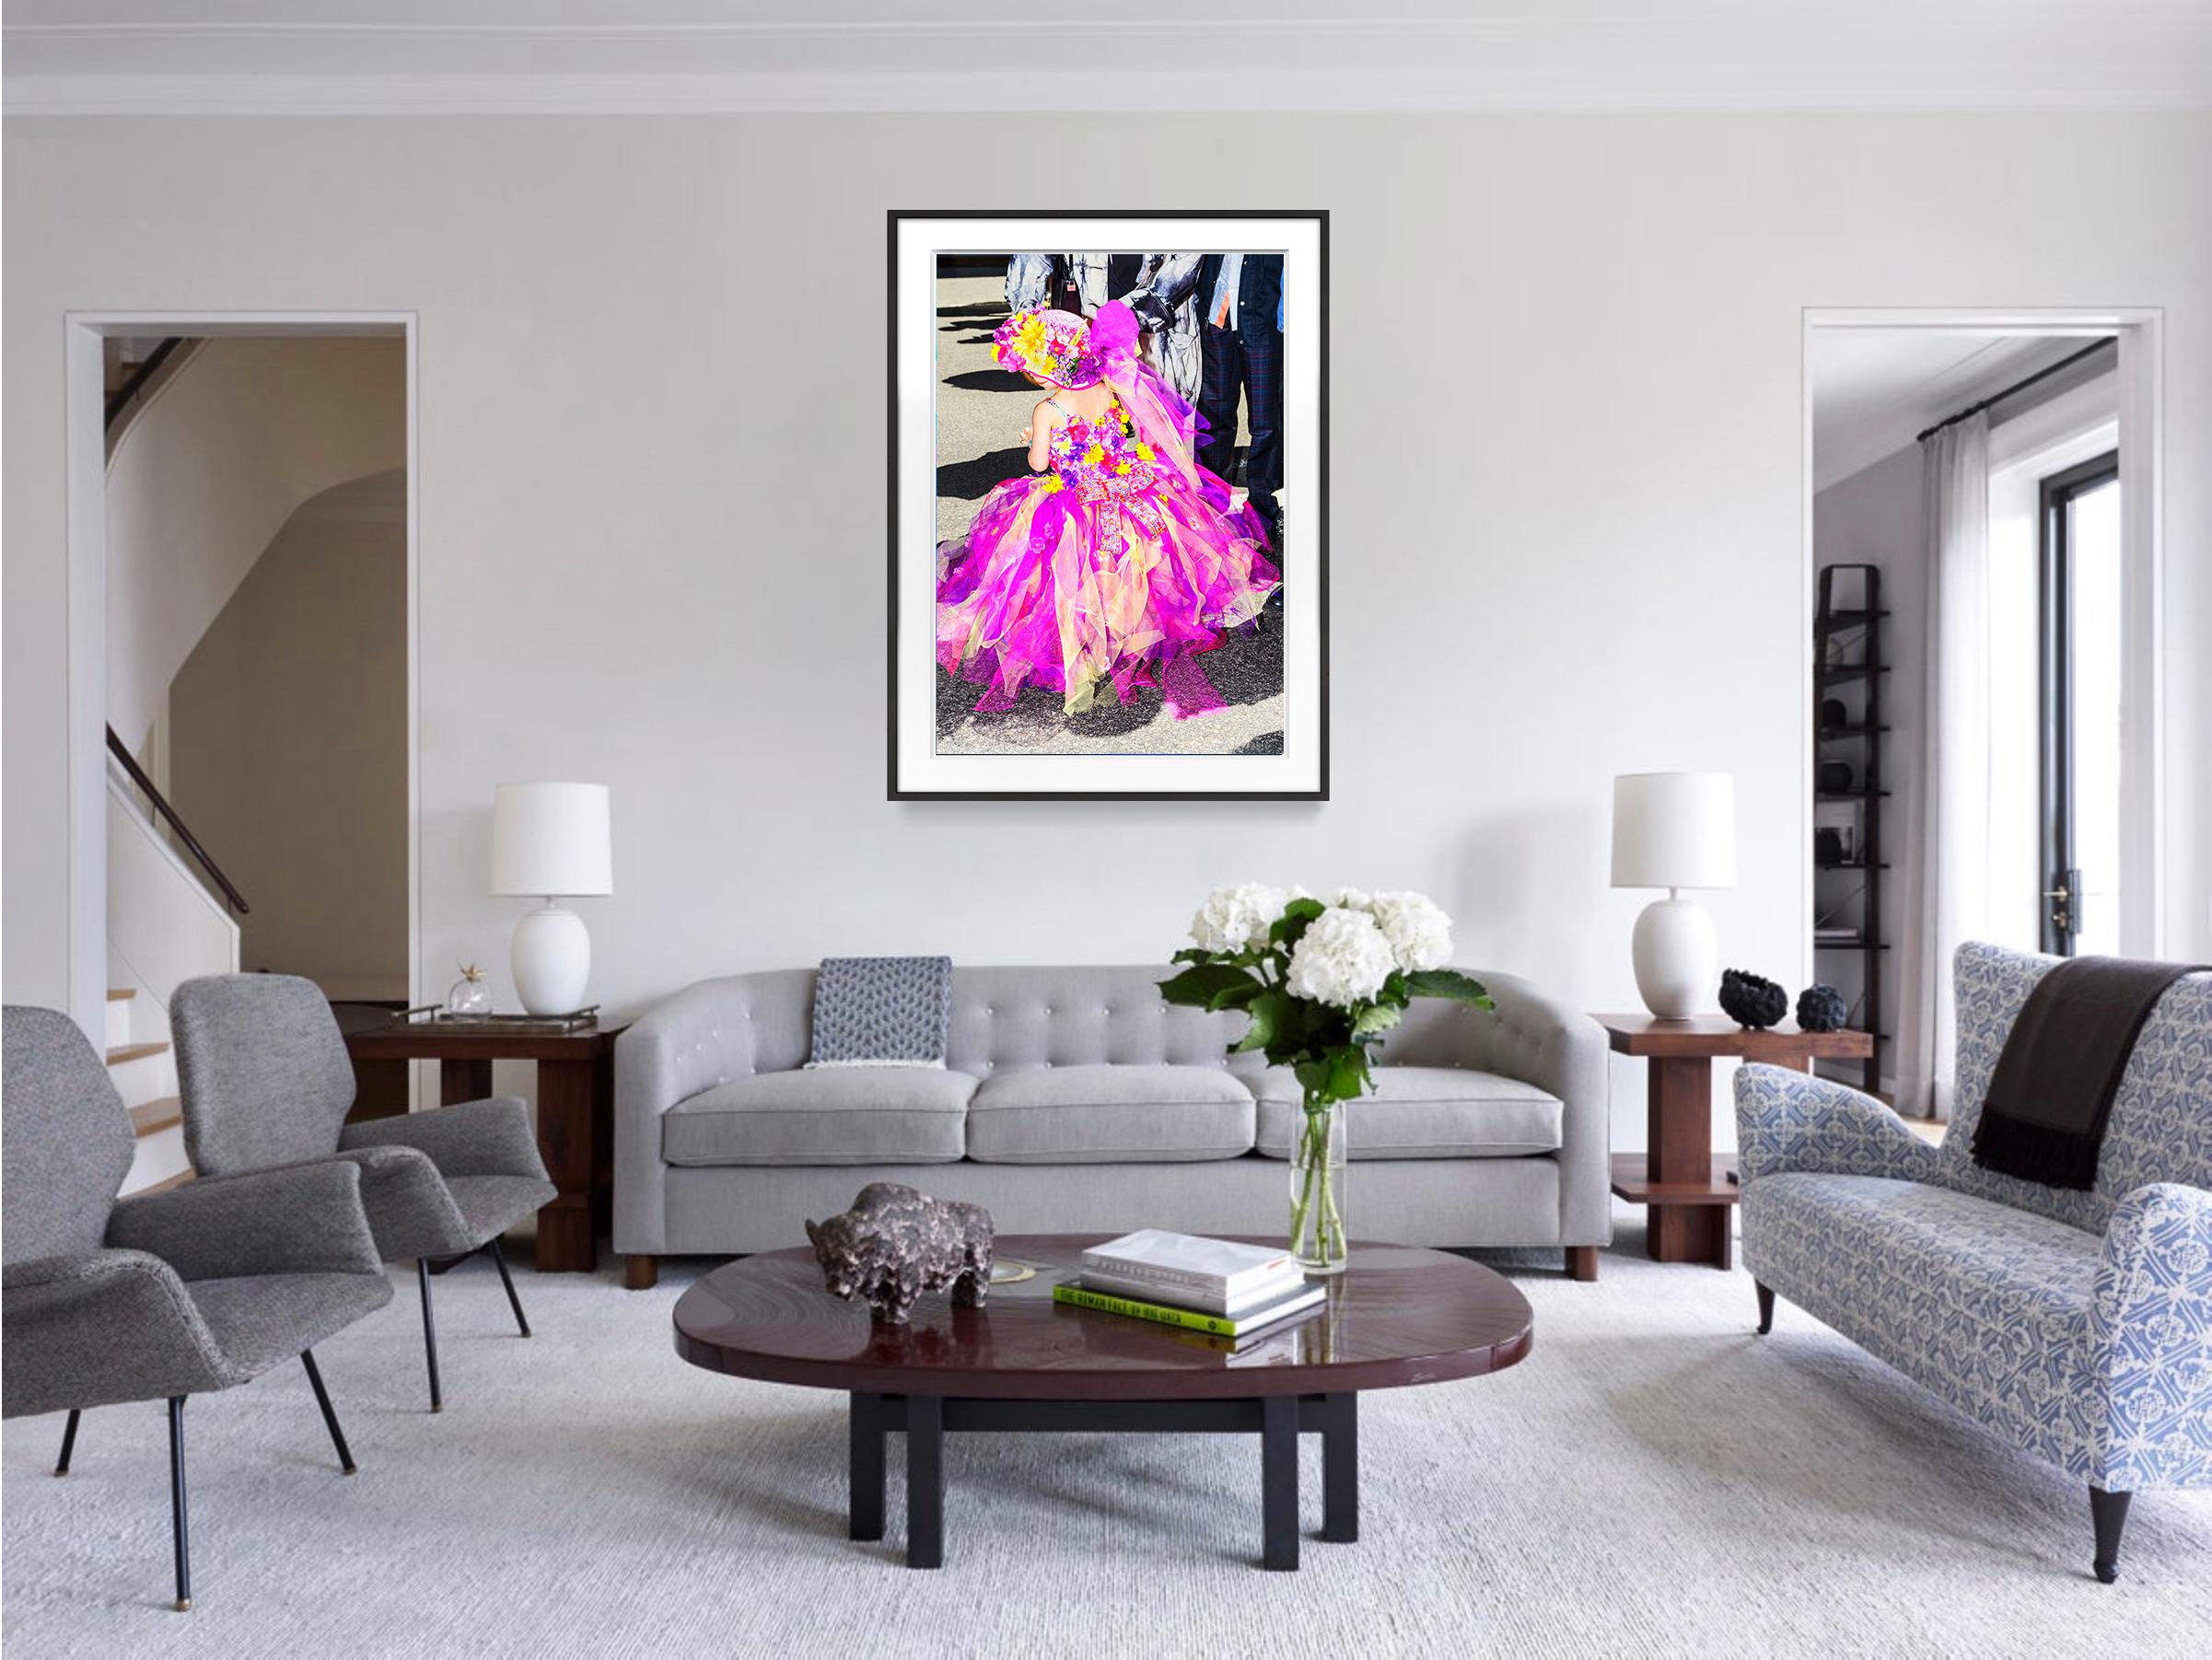 The interplay of light and shadow, greys and magenta transform a portrait of a flamboyantly dressed young girl into an optically engaging abstraction composed of alternating patterns of darks and lights and violets and yellows.   Signed and dated on